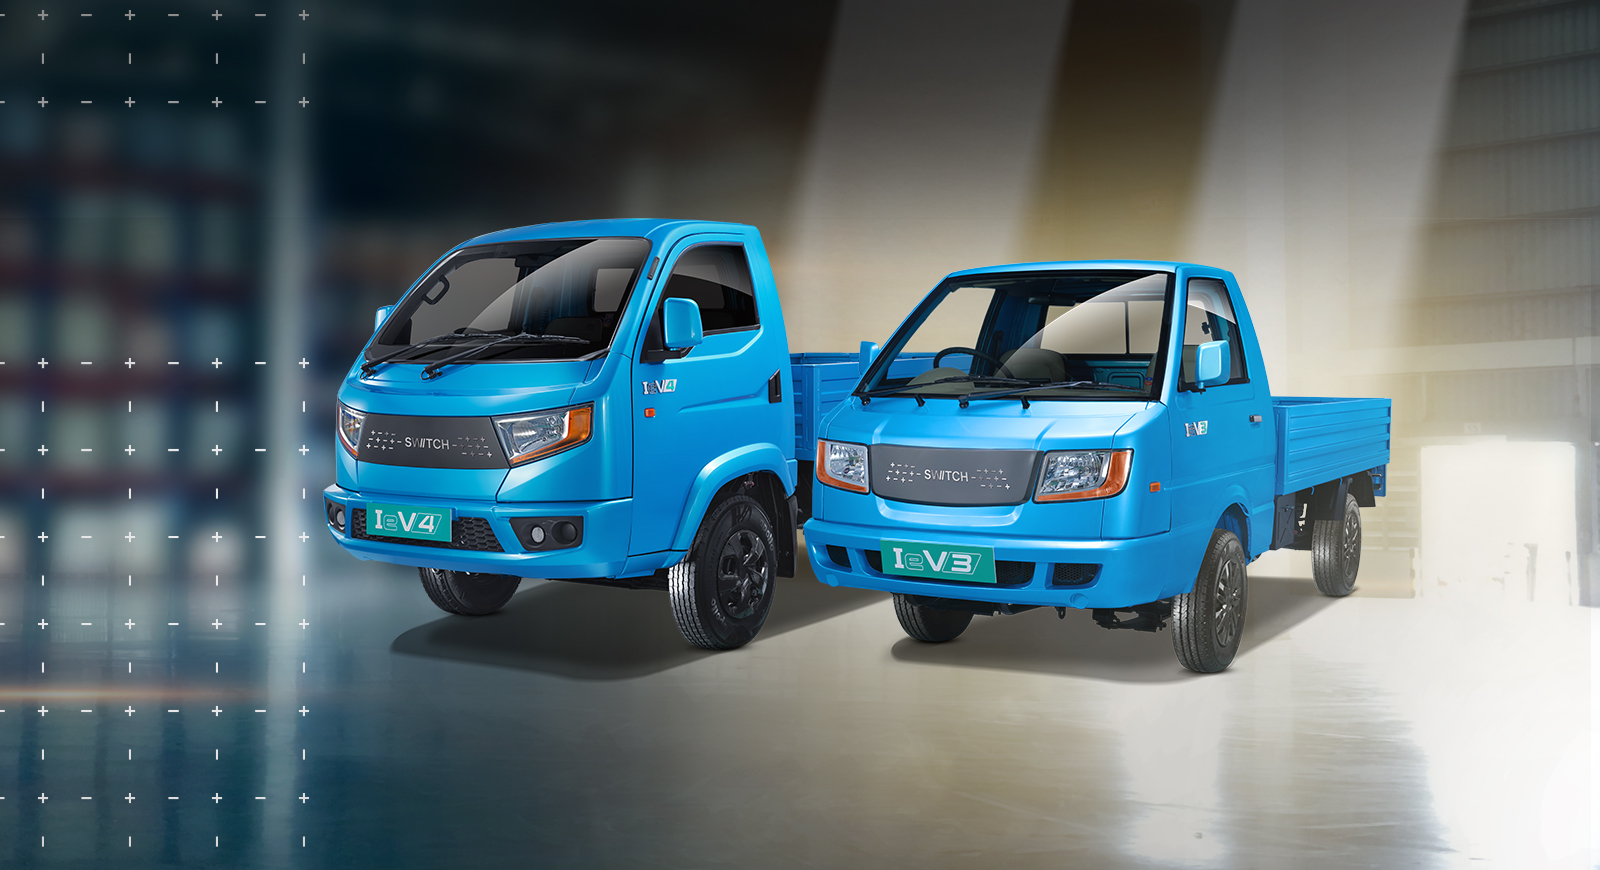 https://e-vehicleinfo.com/switch-iev3-and-iev4-electric-light-commercial-vehicles-launched-in-india/